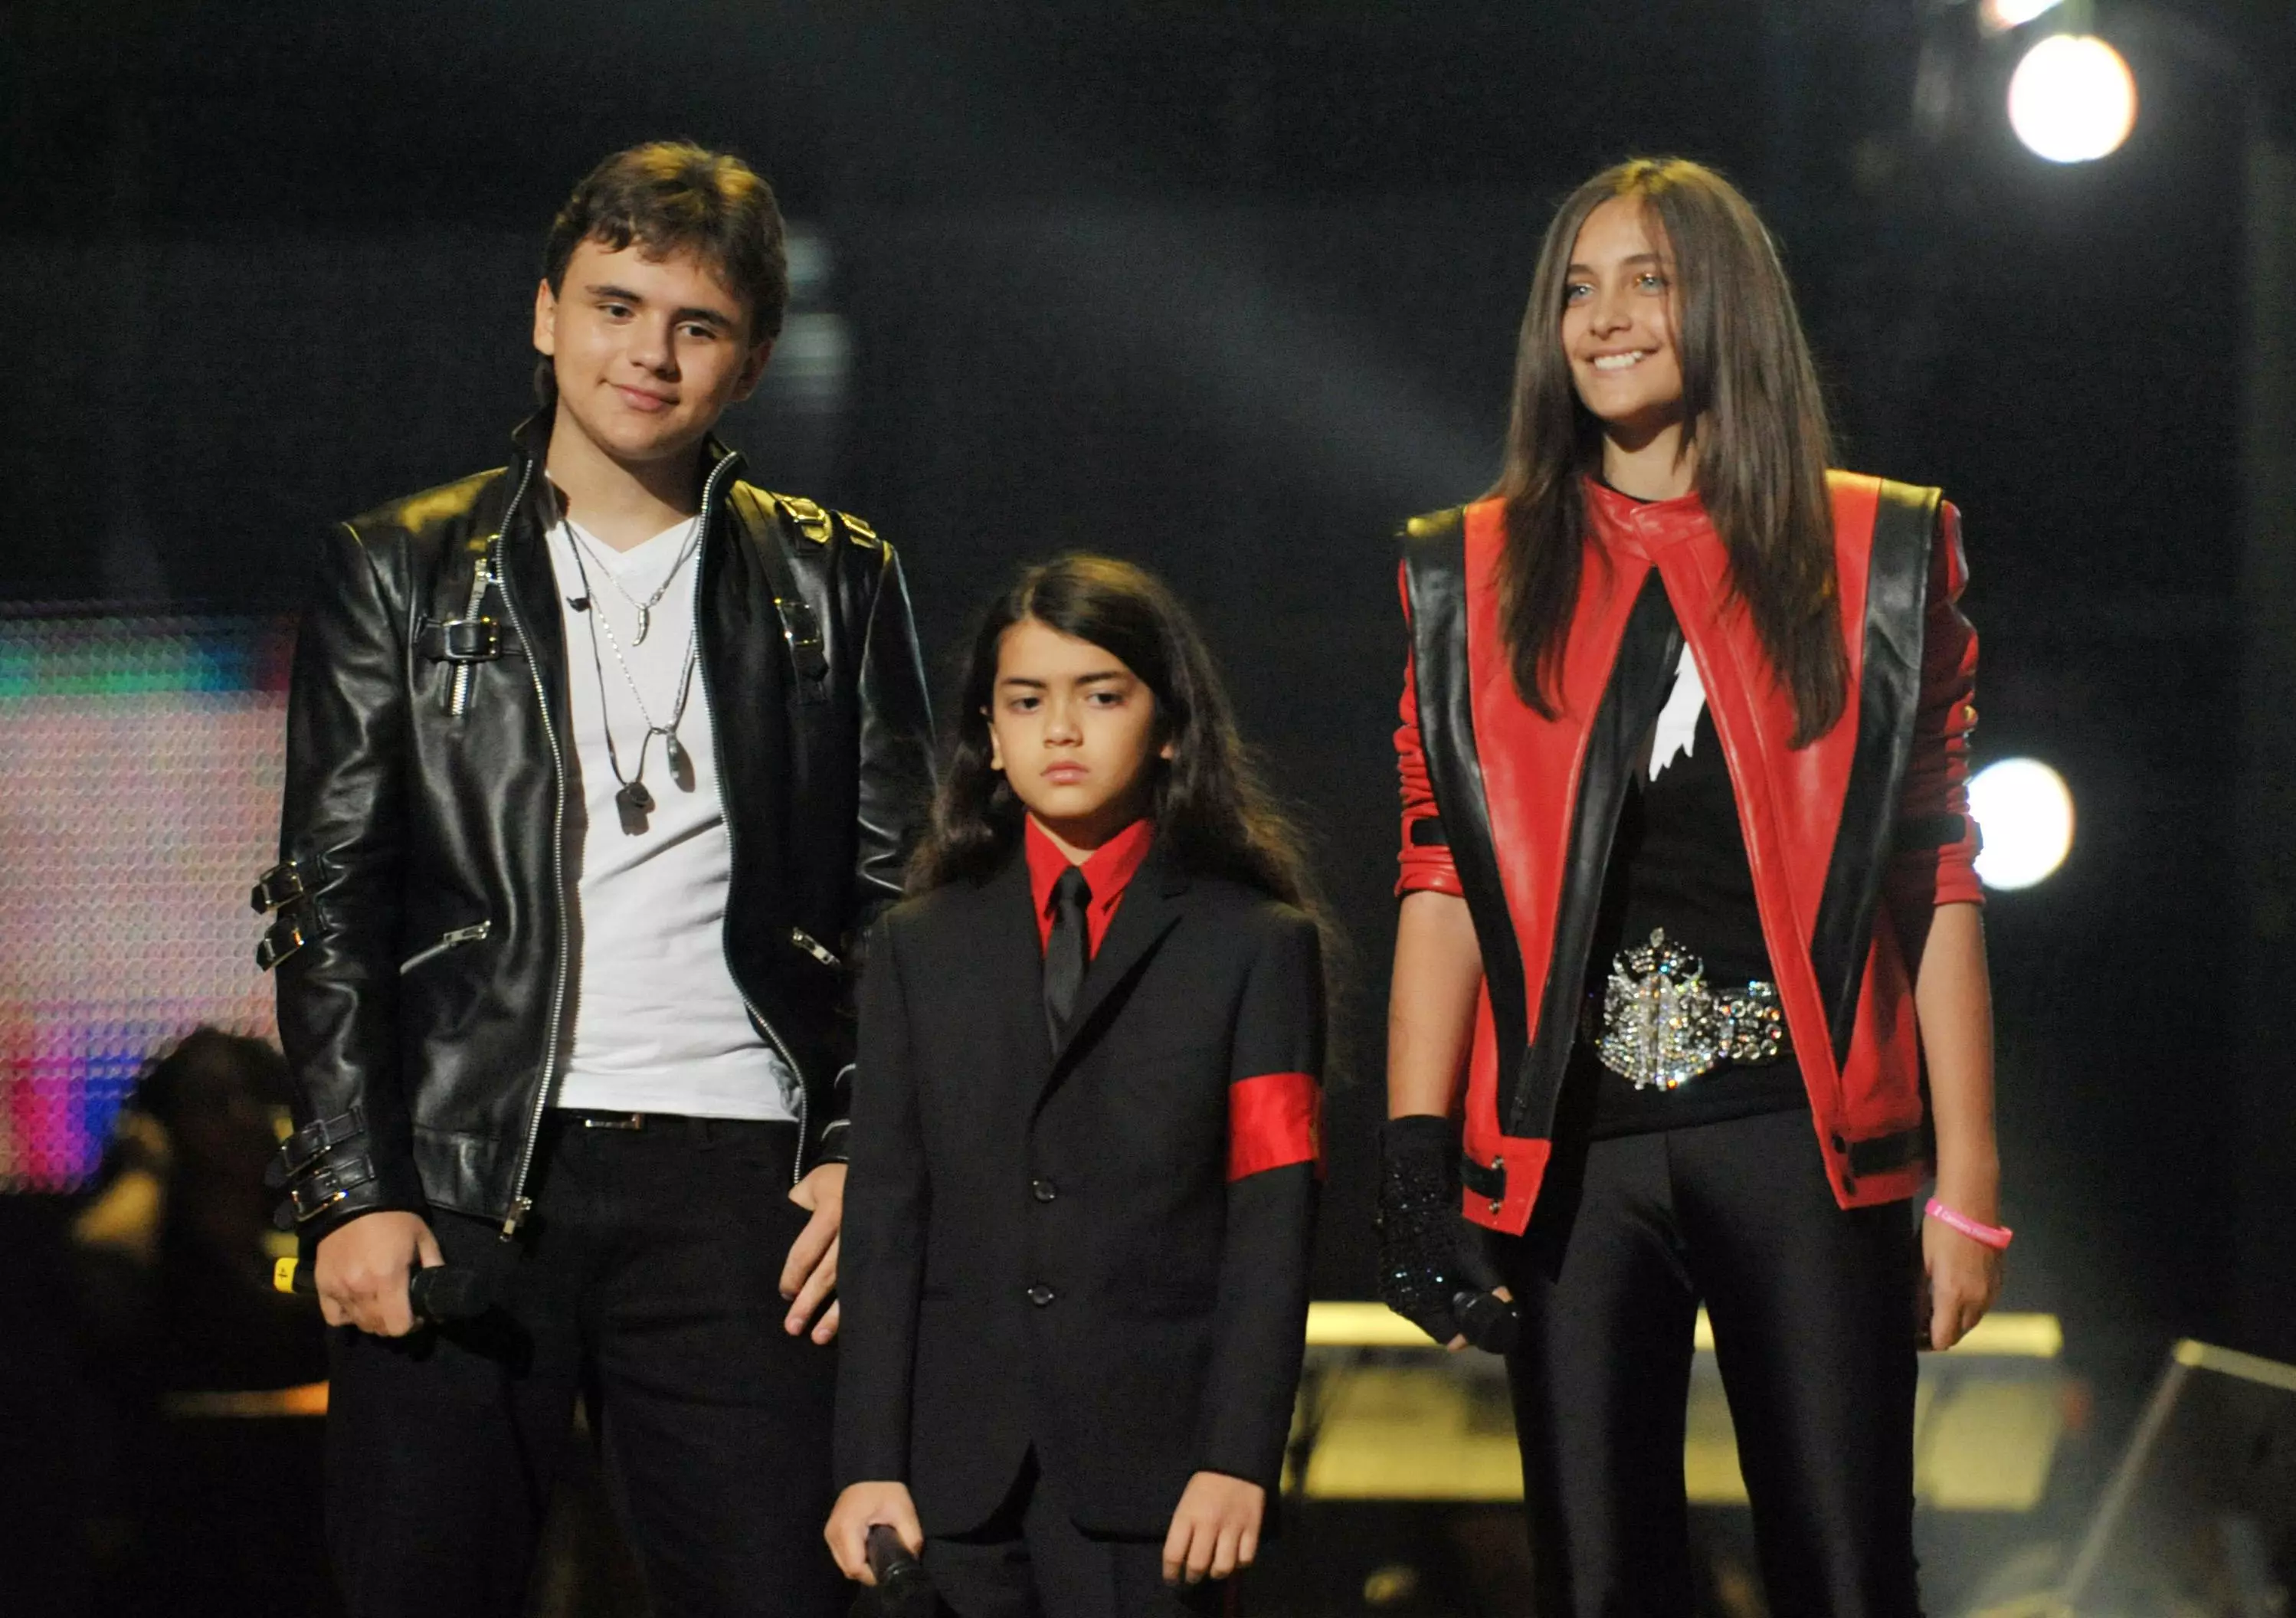 Prince, Blanket and Paris at the Michael Forever Tribute Concert in 2011.